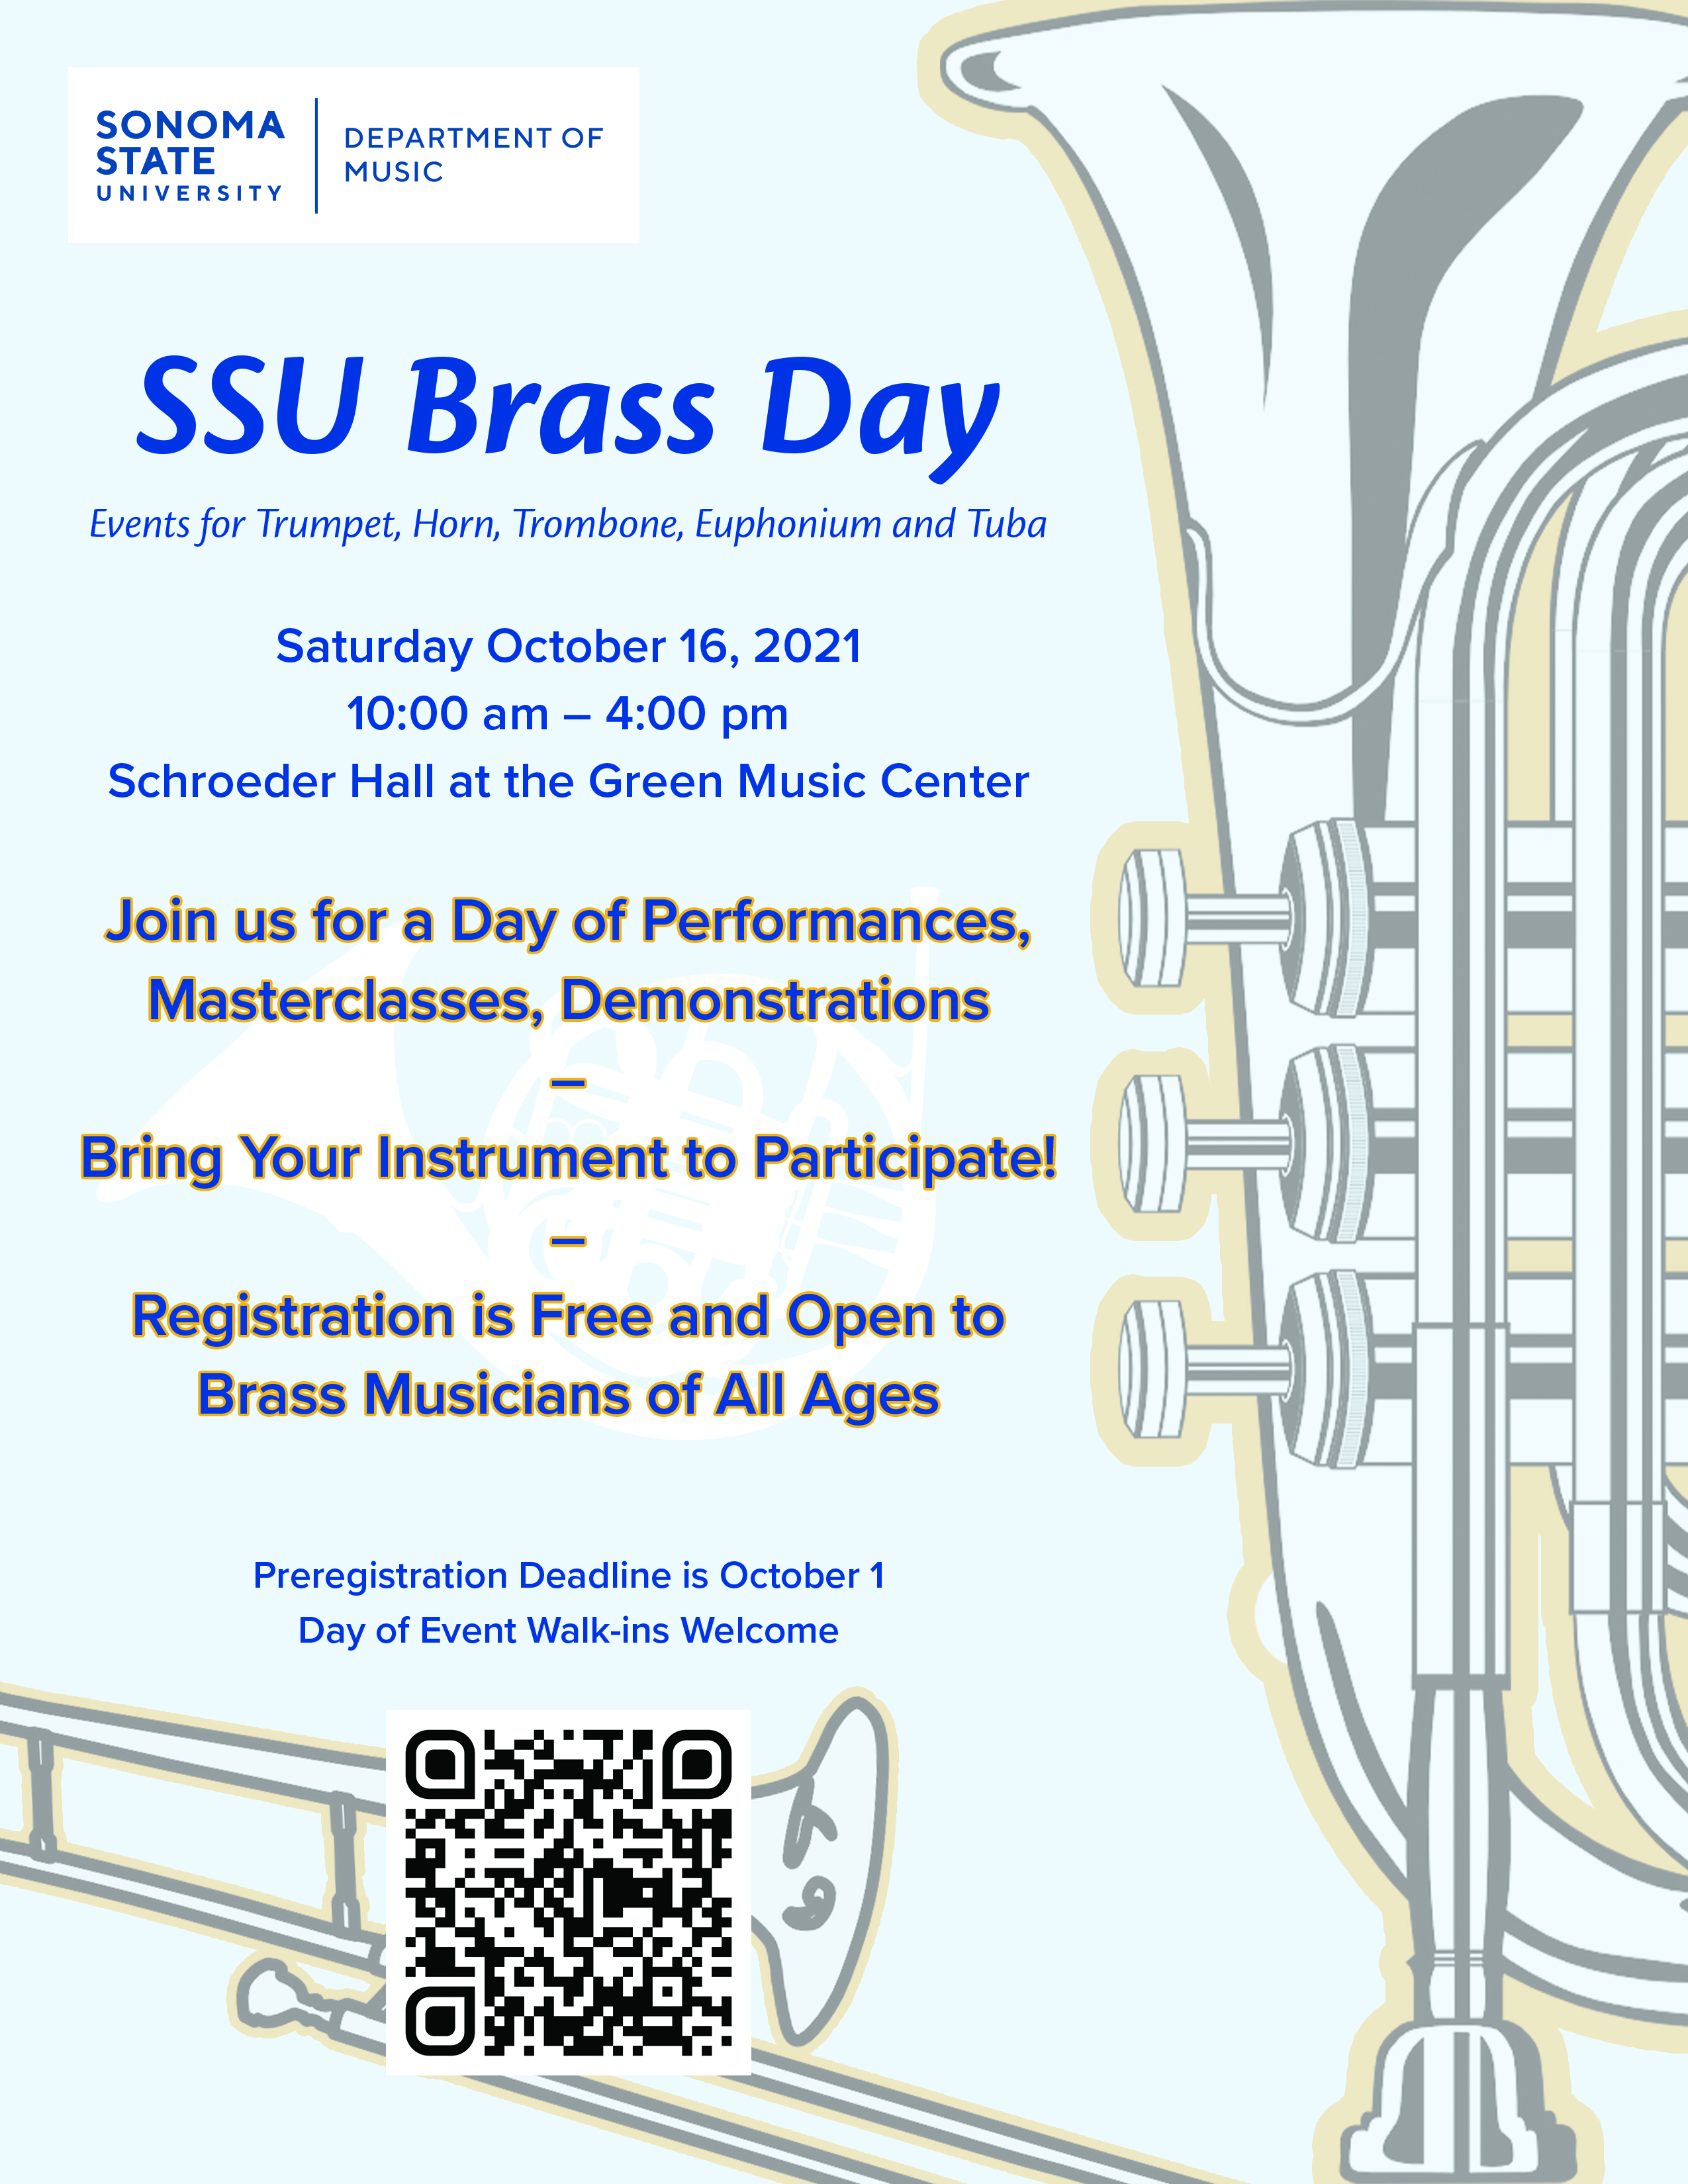 The flyer for the 2021 SSU Brass Day event 